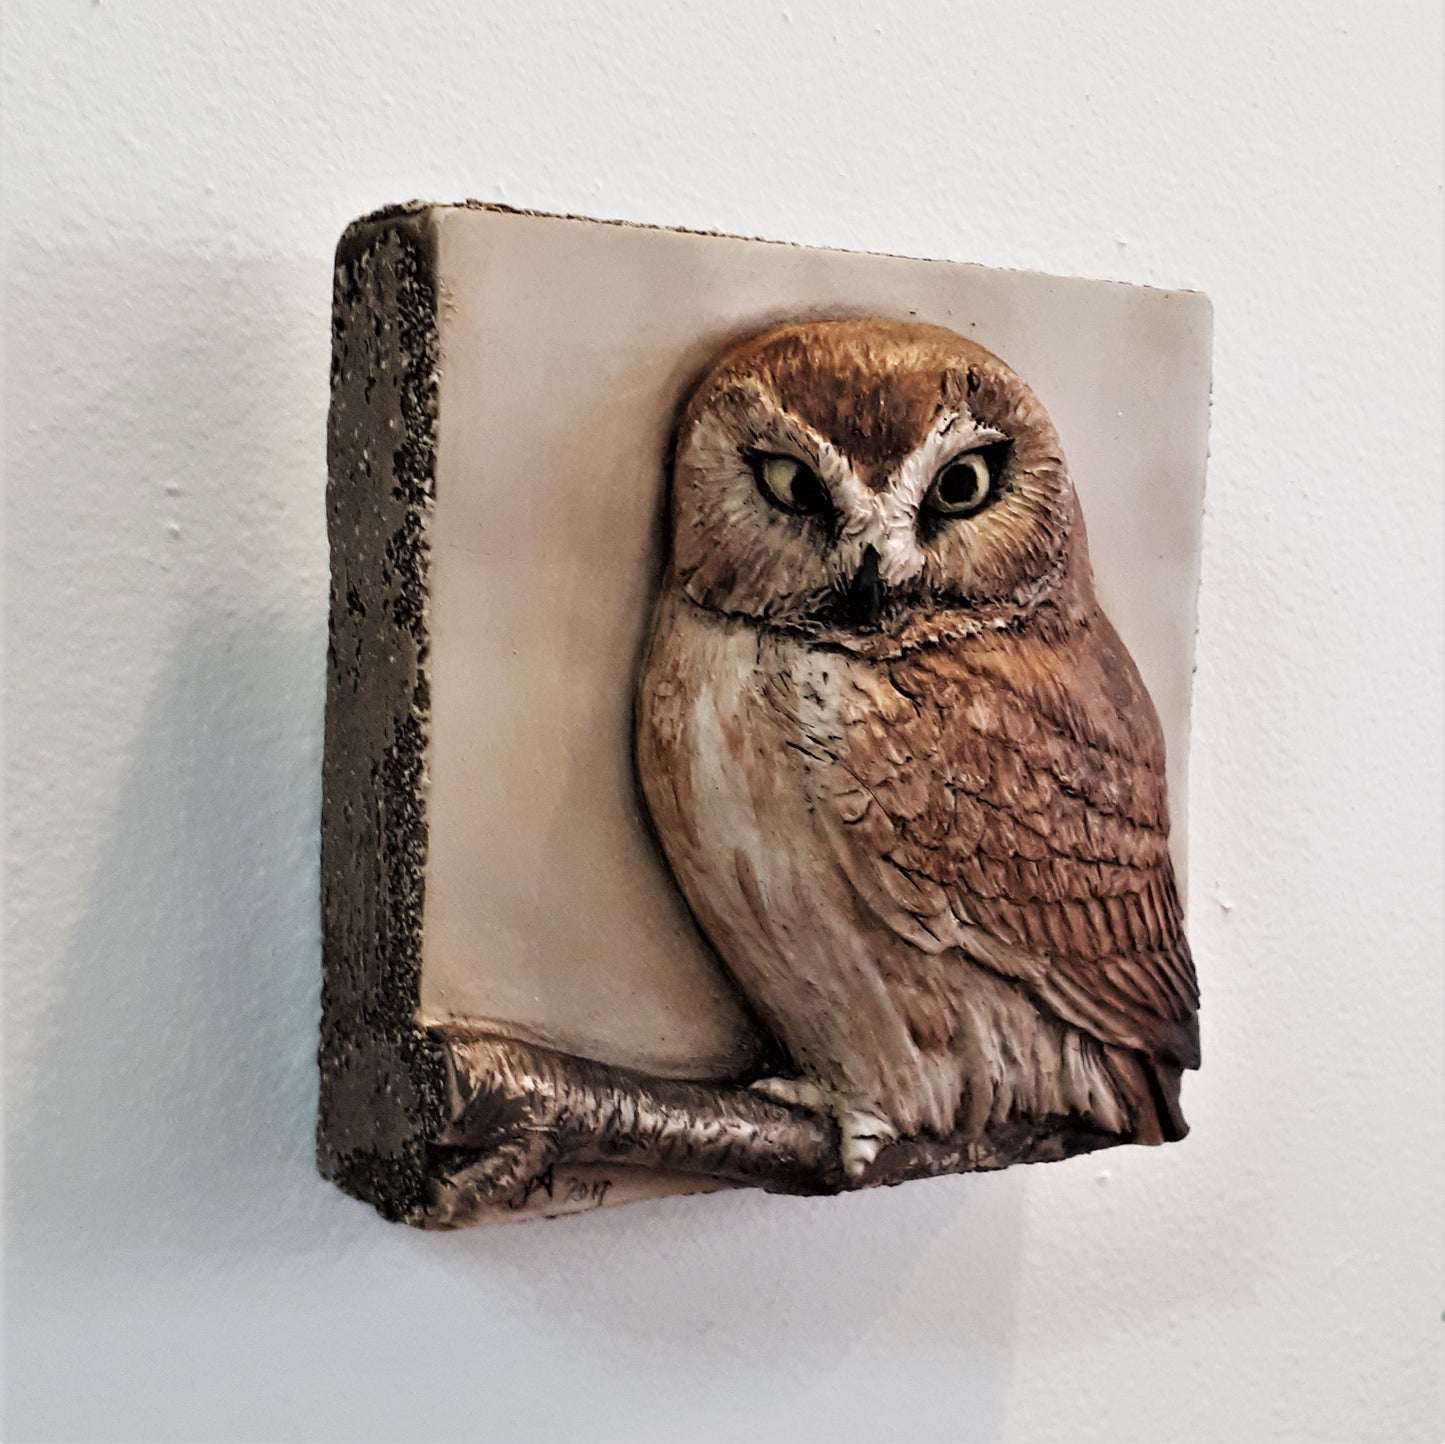 Limited Edition OWL - Sculpted Cast Handpainted Hydrostone